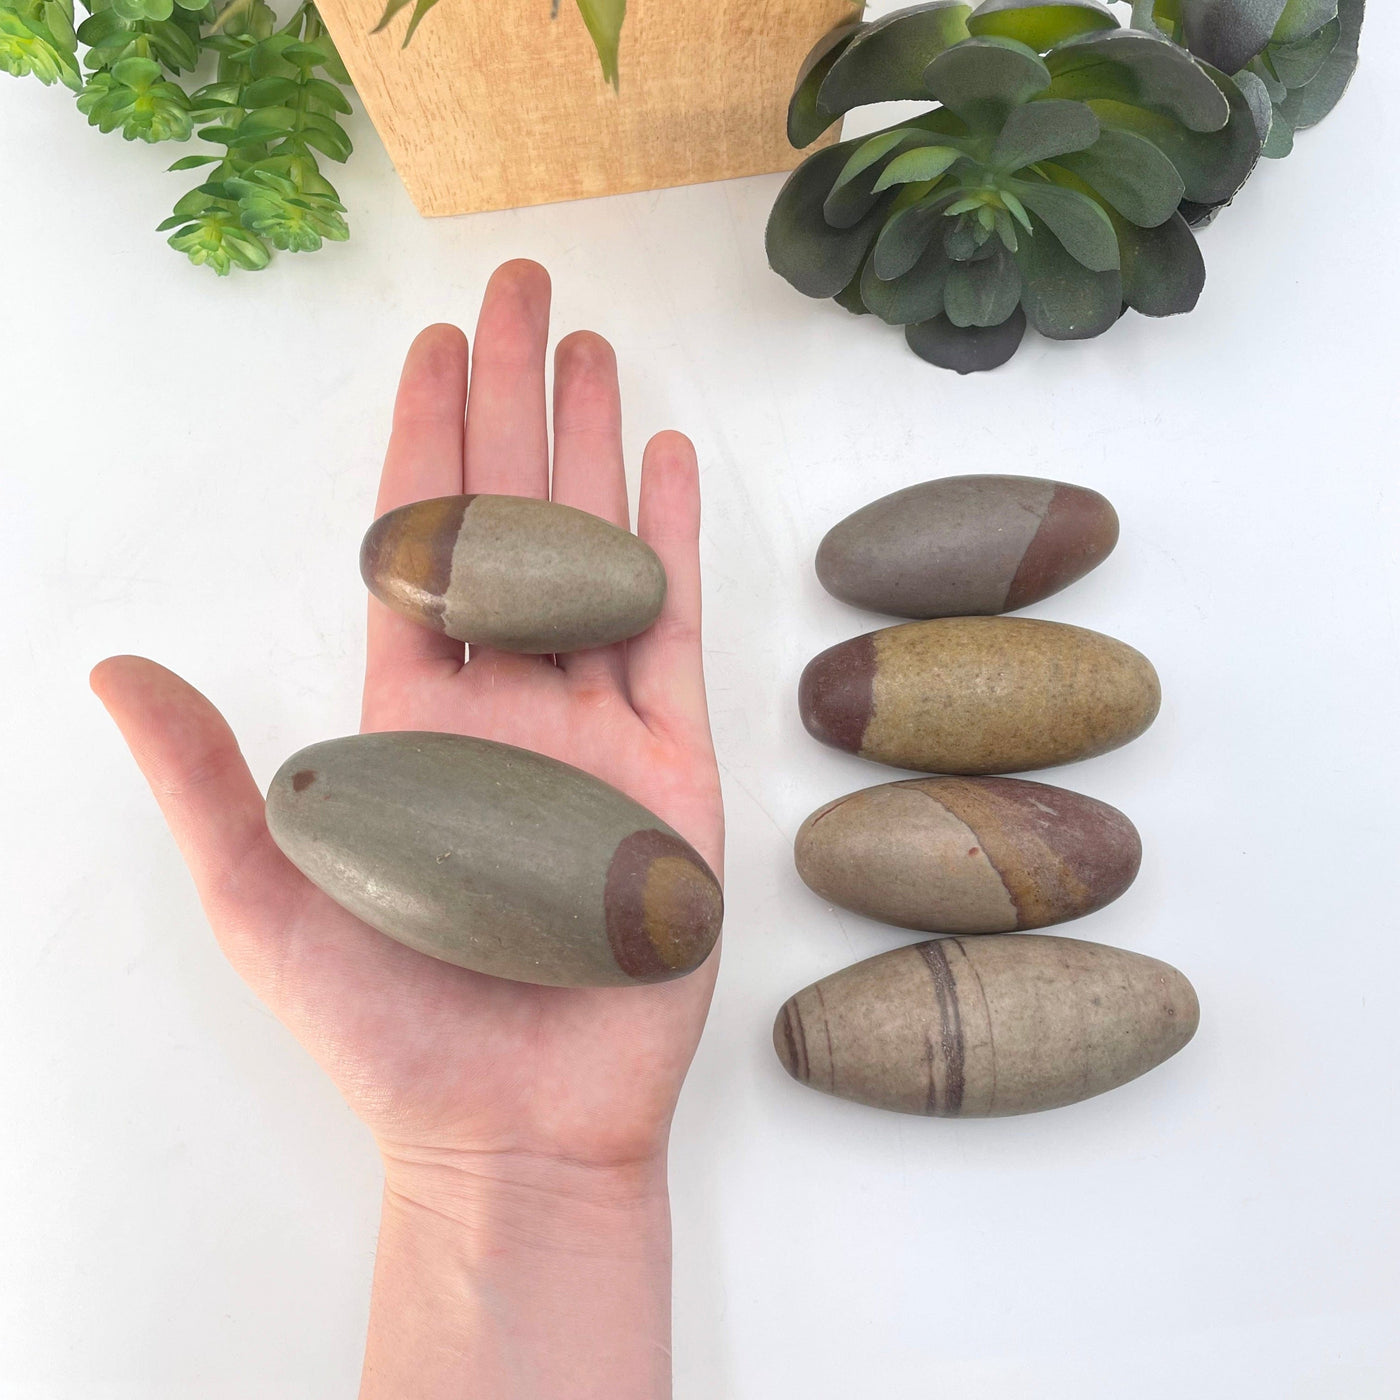 shiva lingam stones in hand and on display